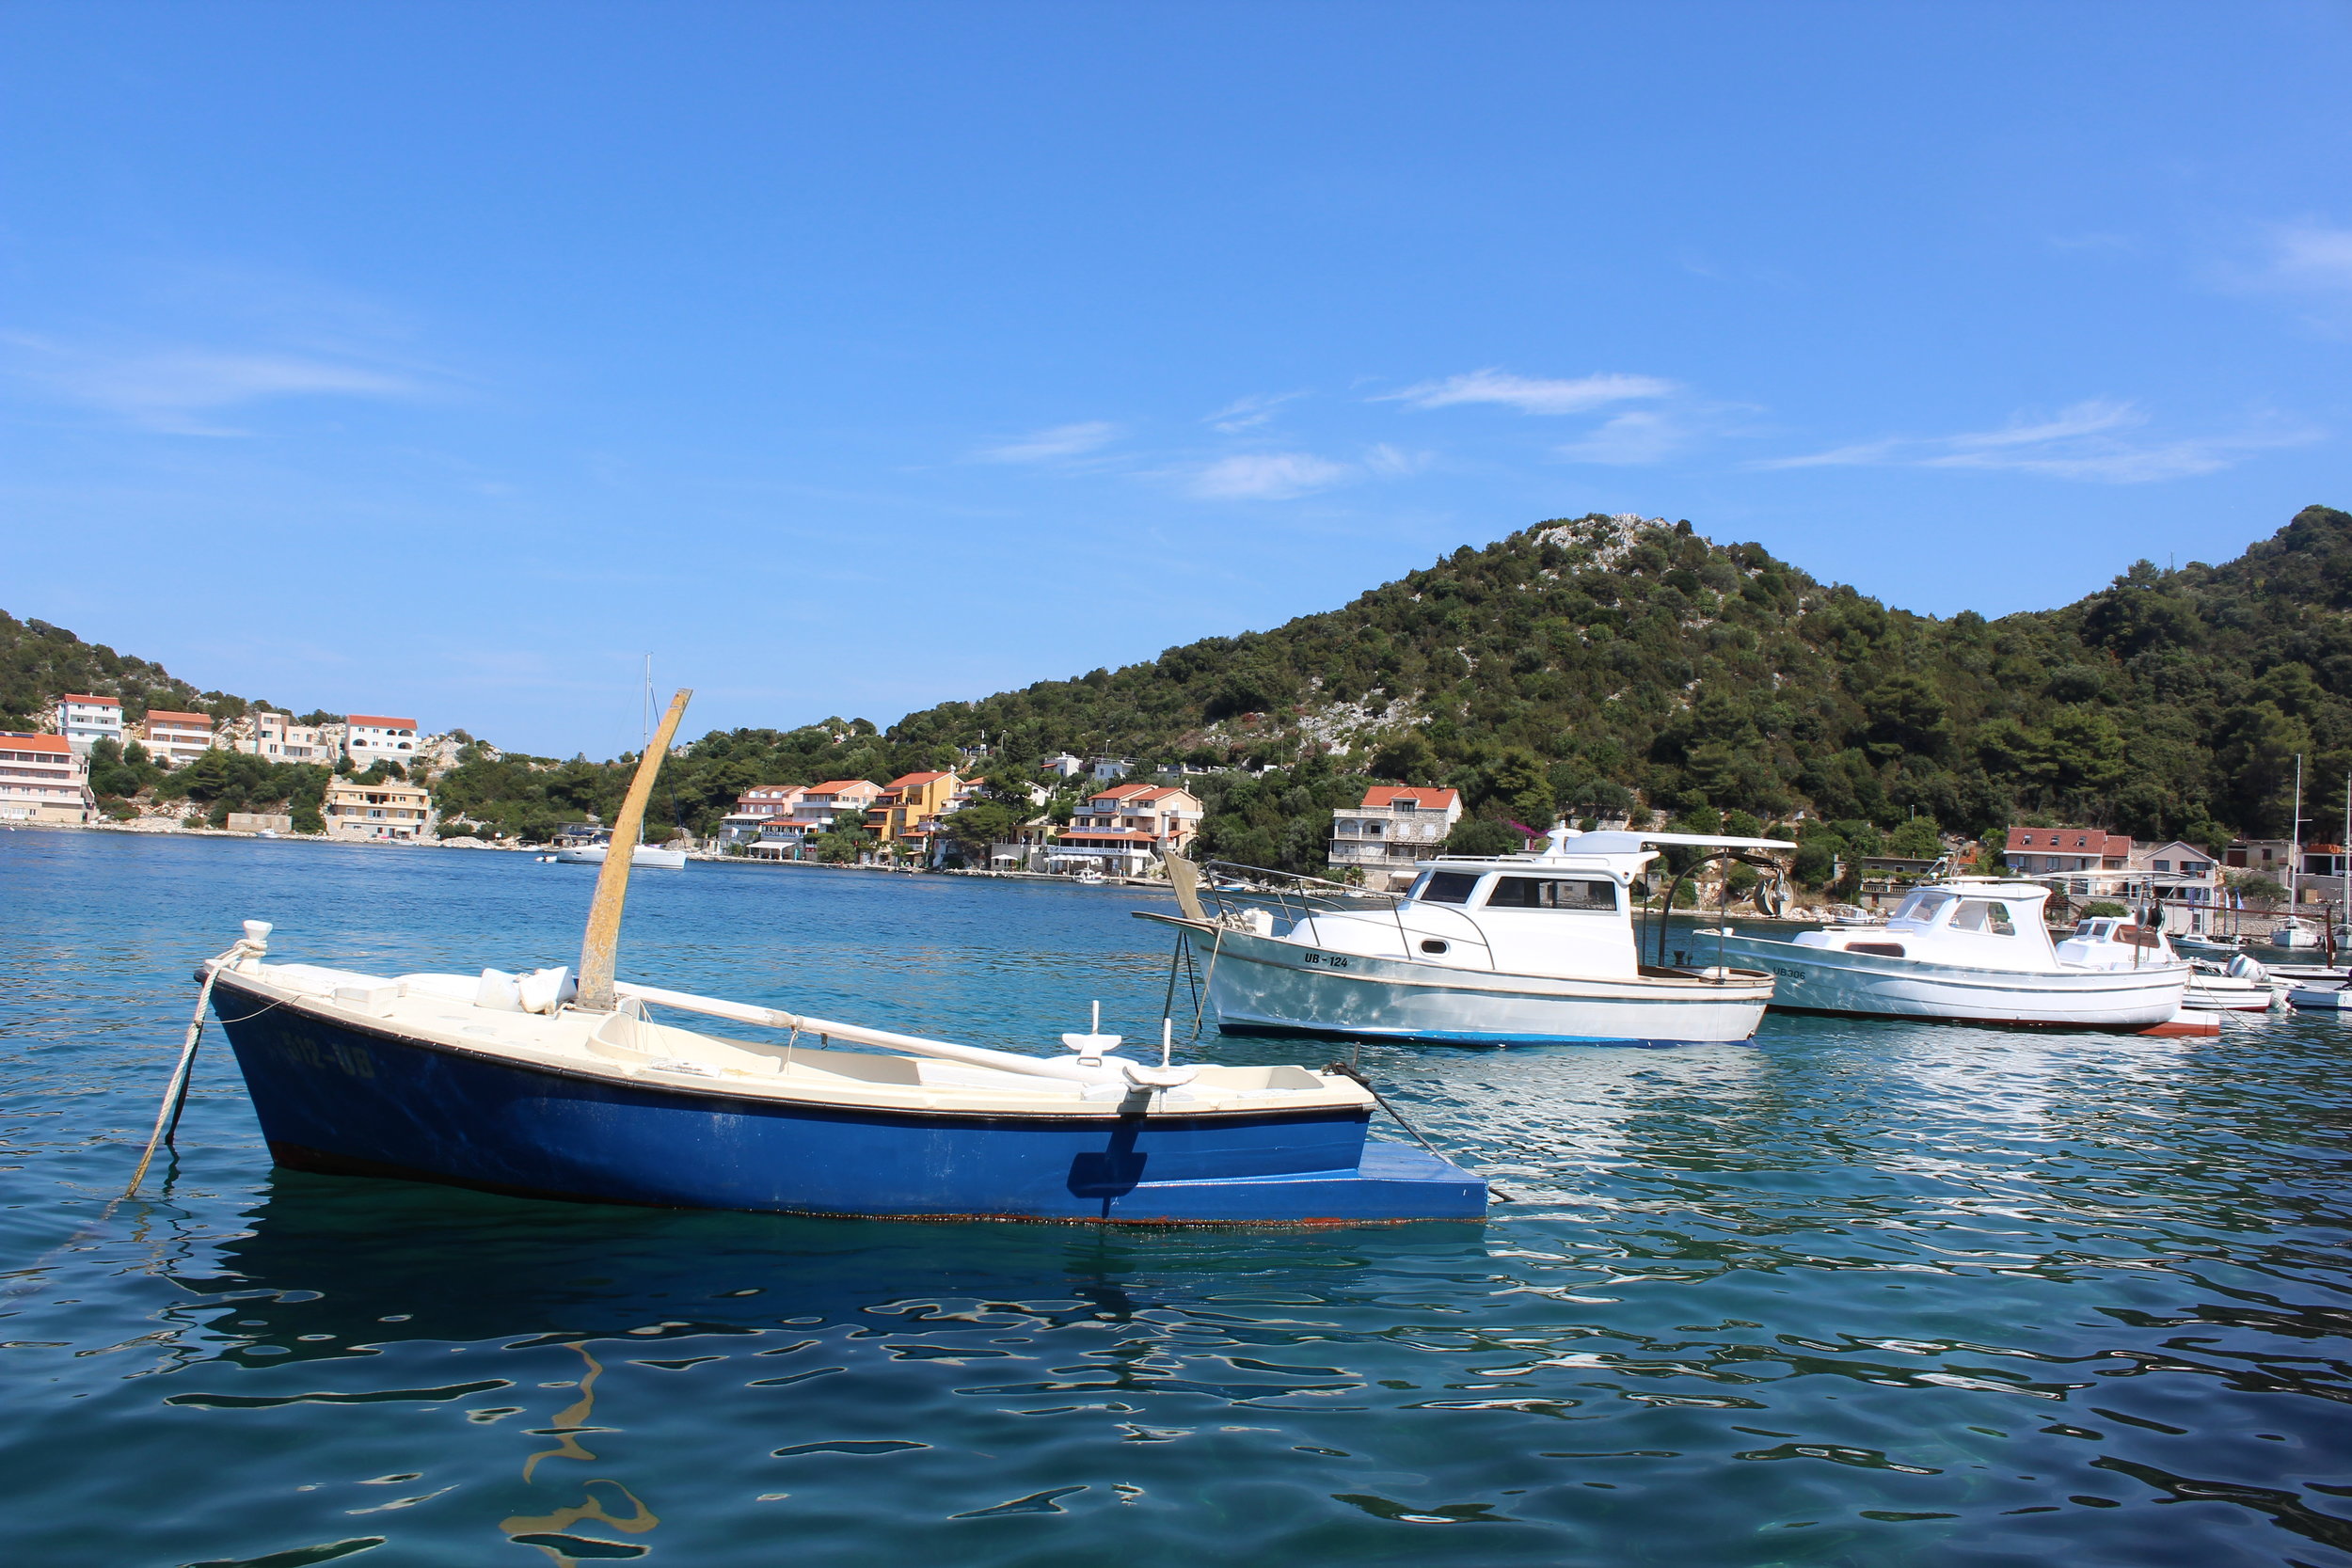 The beautiful bay of the town we stayed in, just a little over a mile from Lastovo